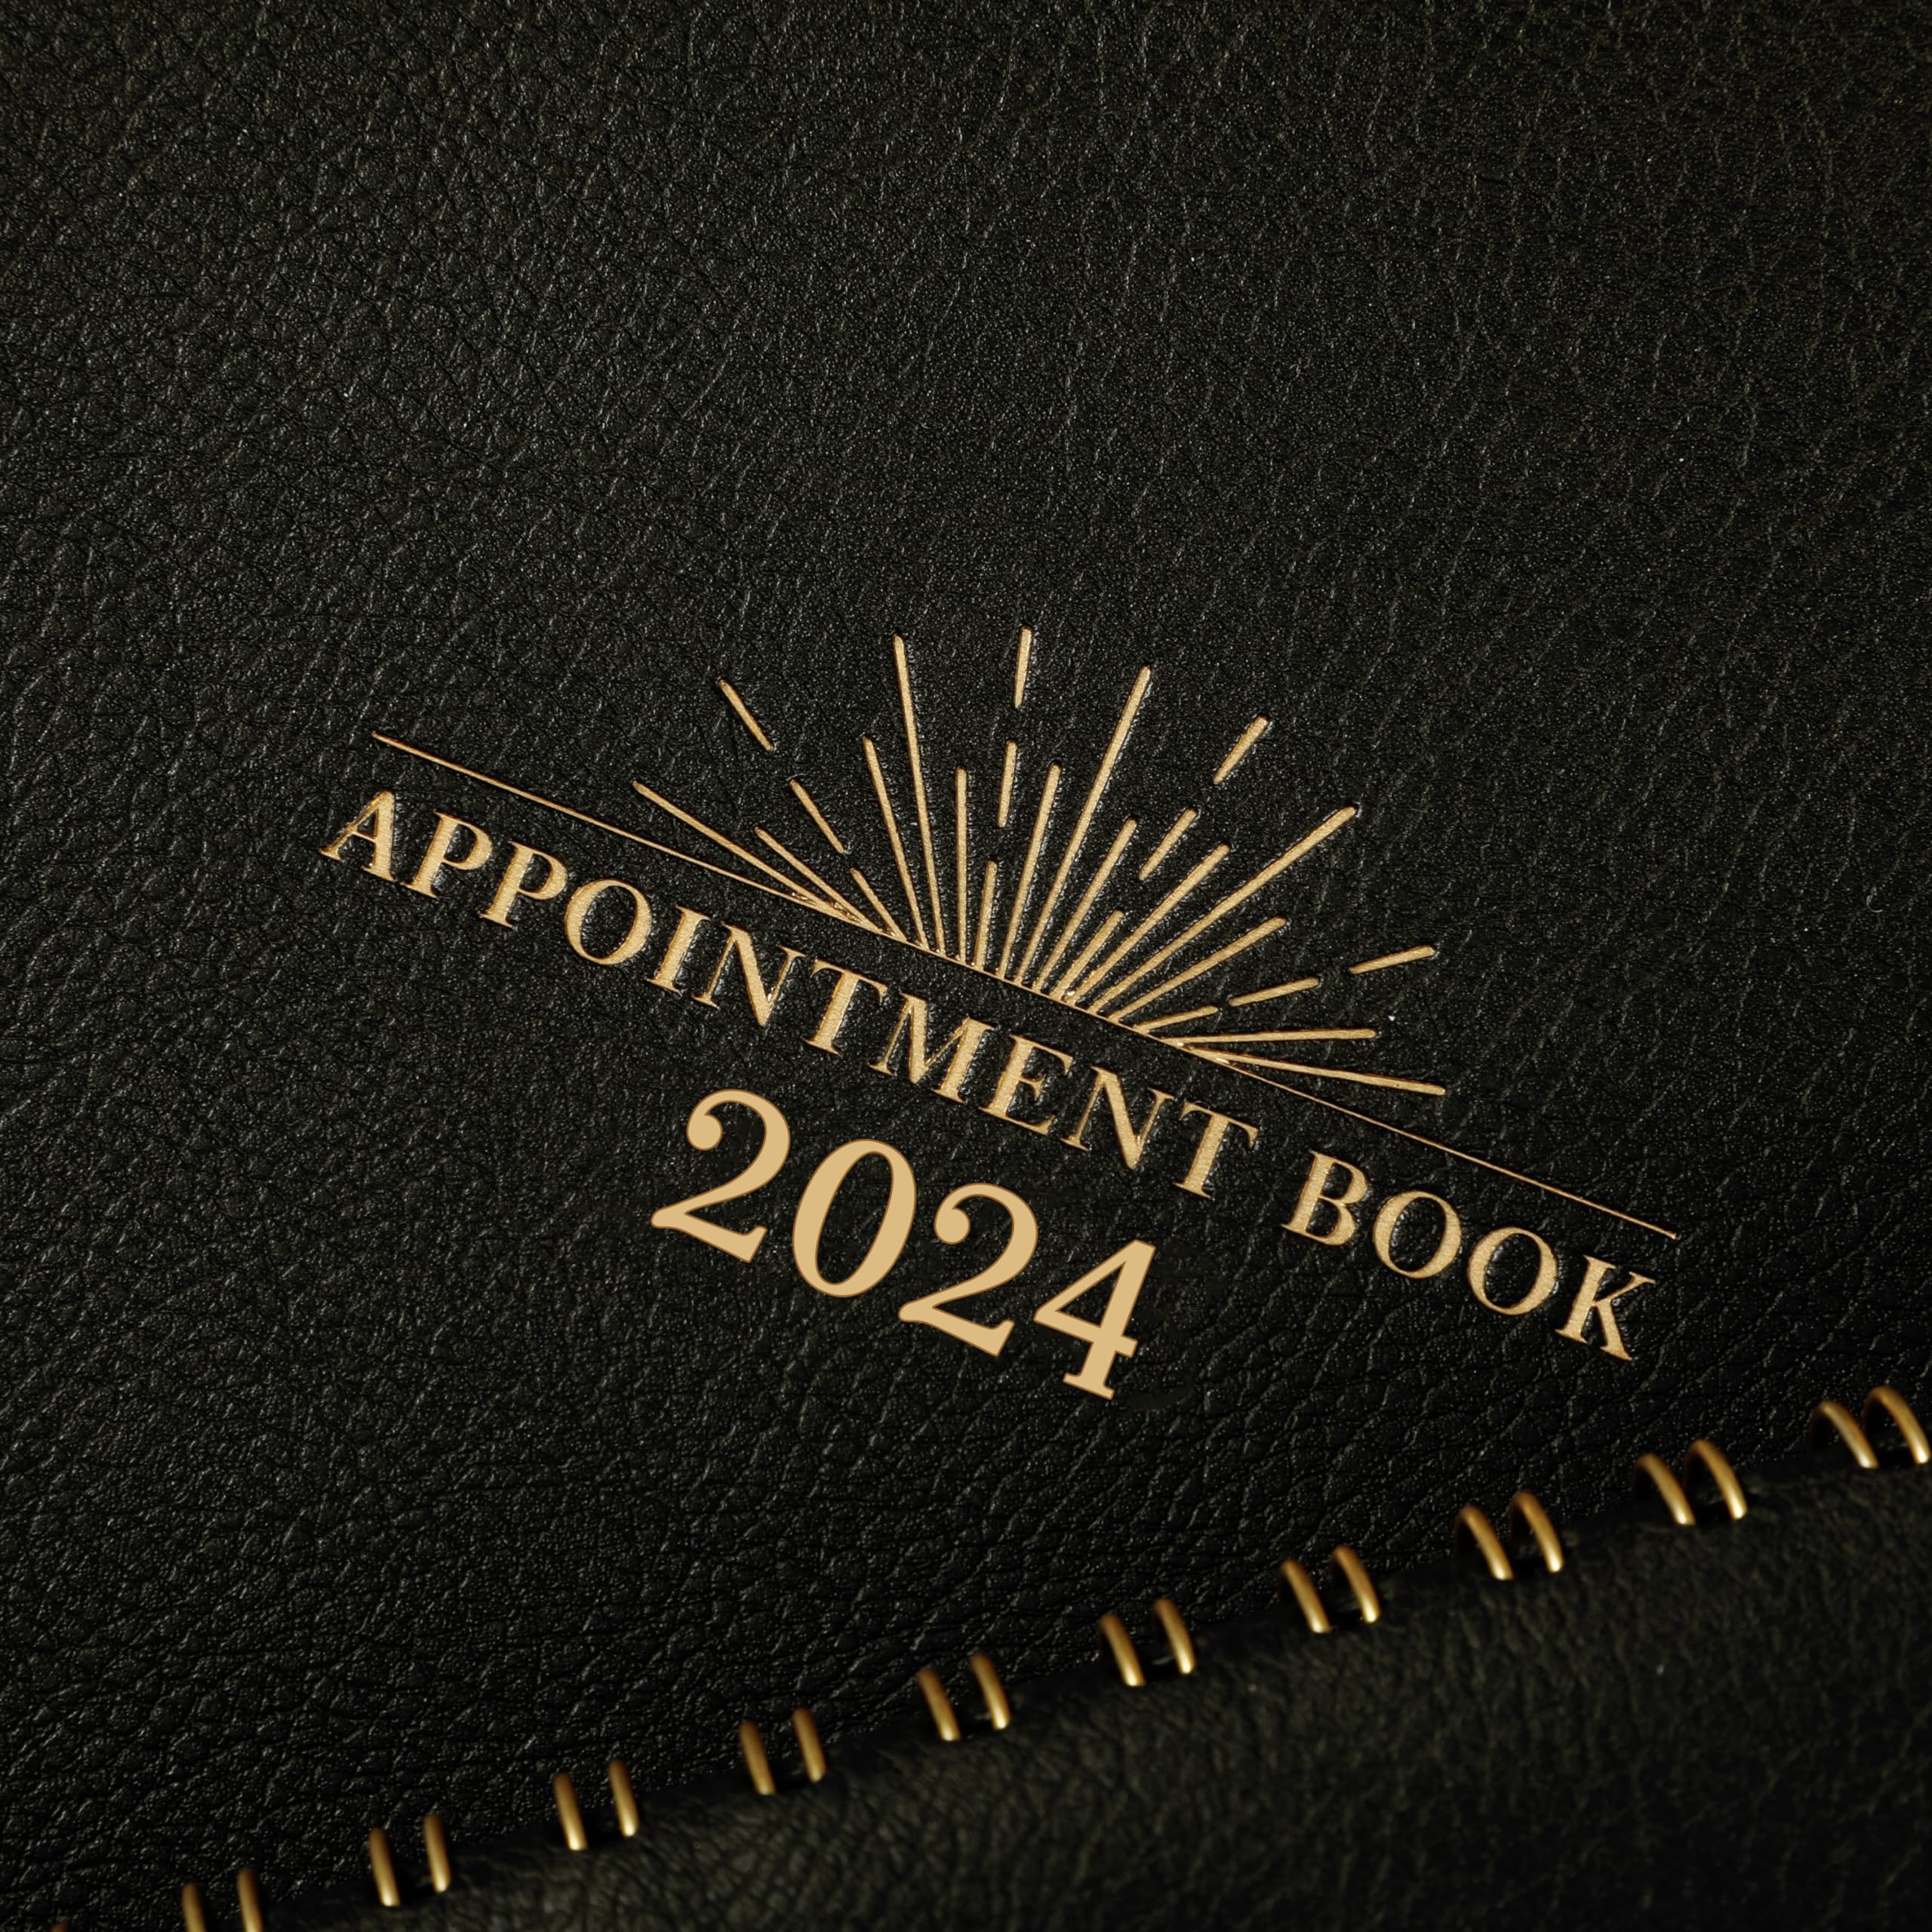 2024 Appointment Book/Planner - Weekly Appointment Book/Planner 2024, Jan 2024 - Dec 2024, 8"x 10", 2024 Daily/Hourly Planner with Tabs, 15-Minute Interval, Flexible Soft Cover - Black